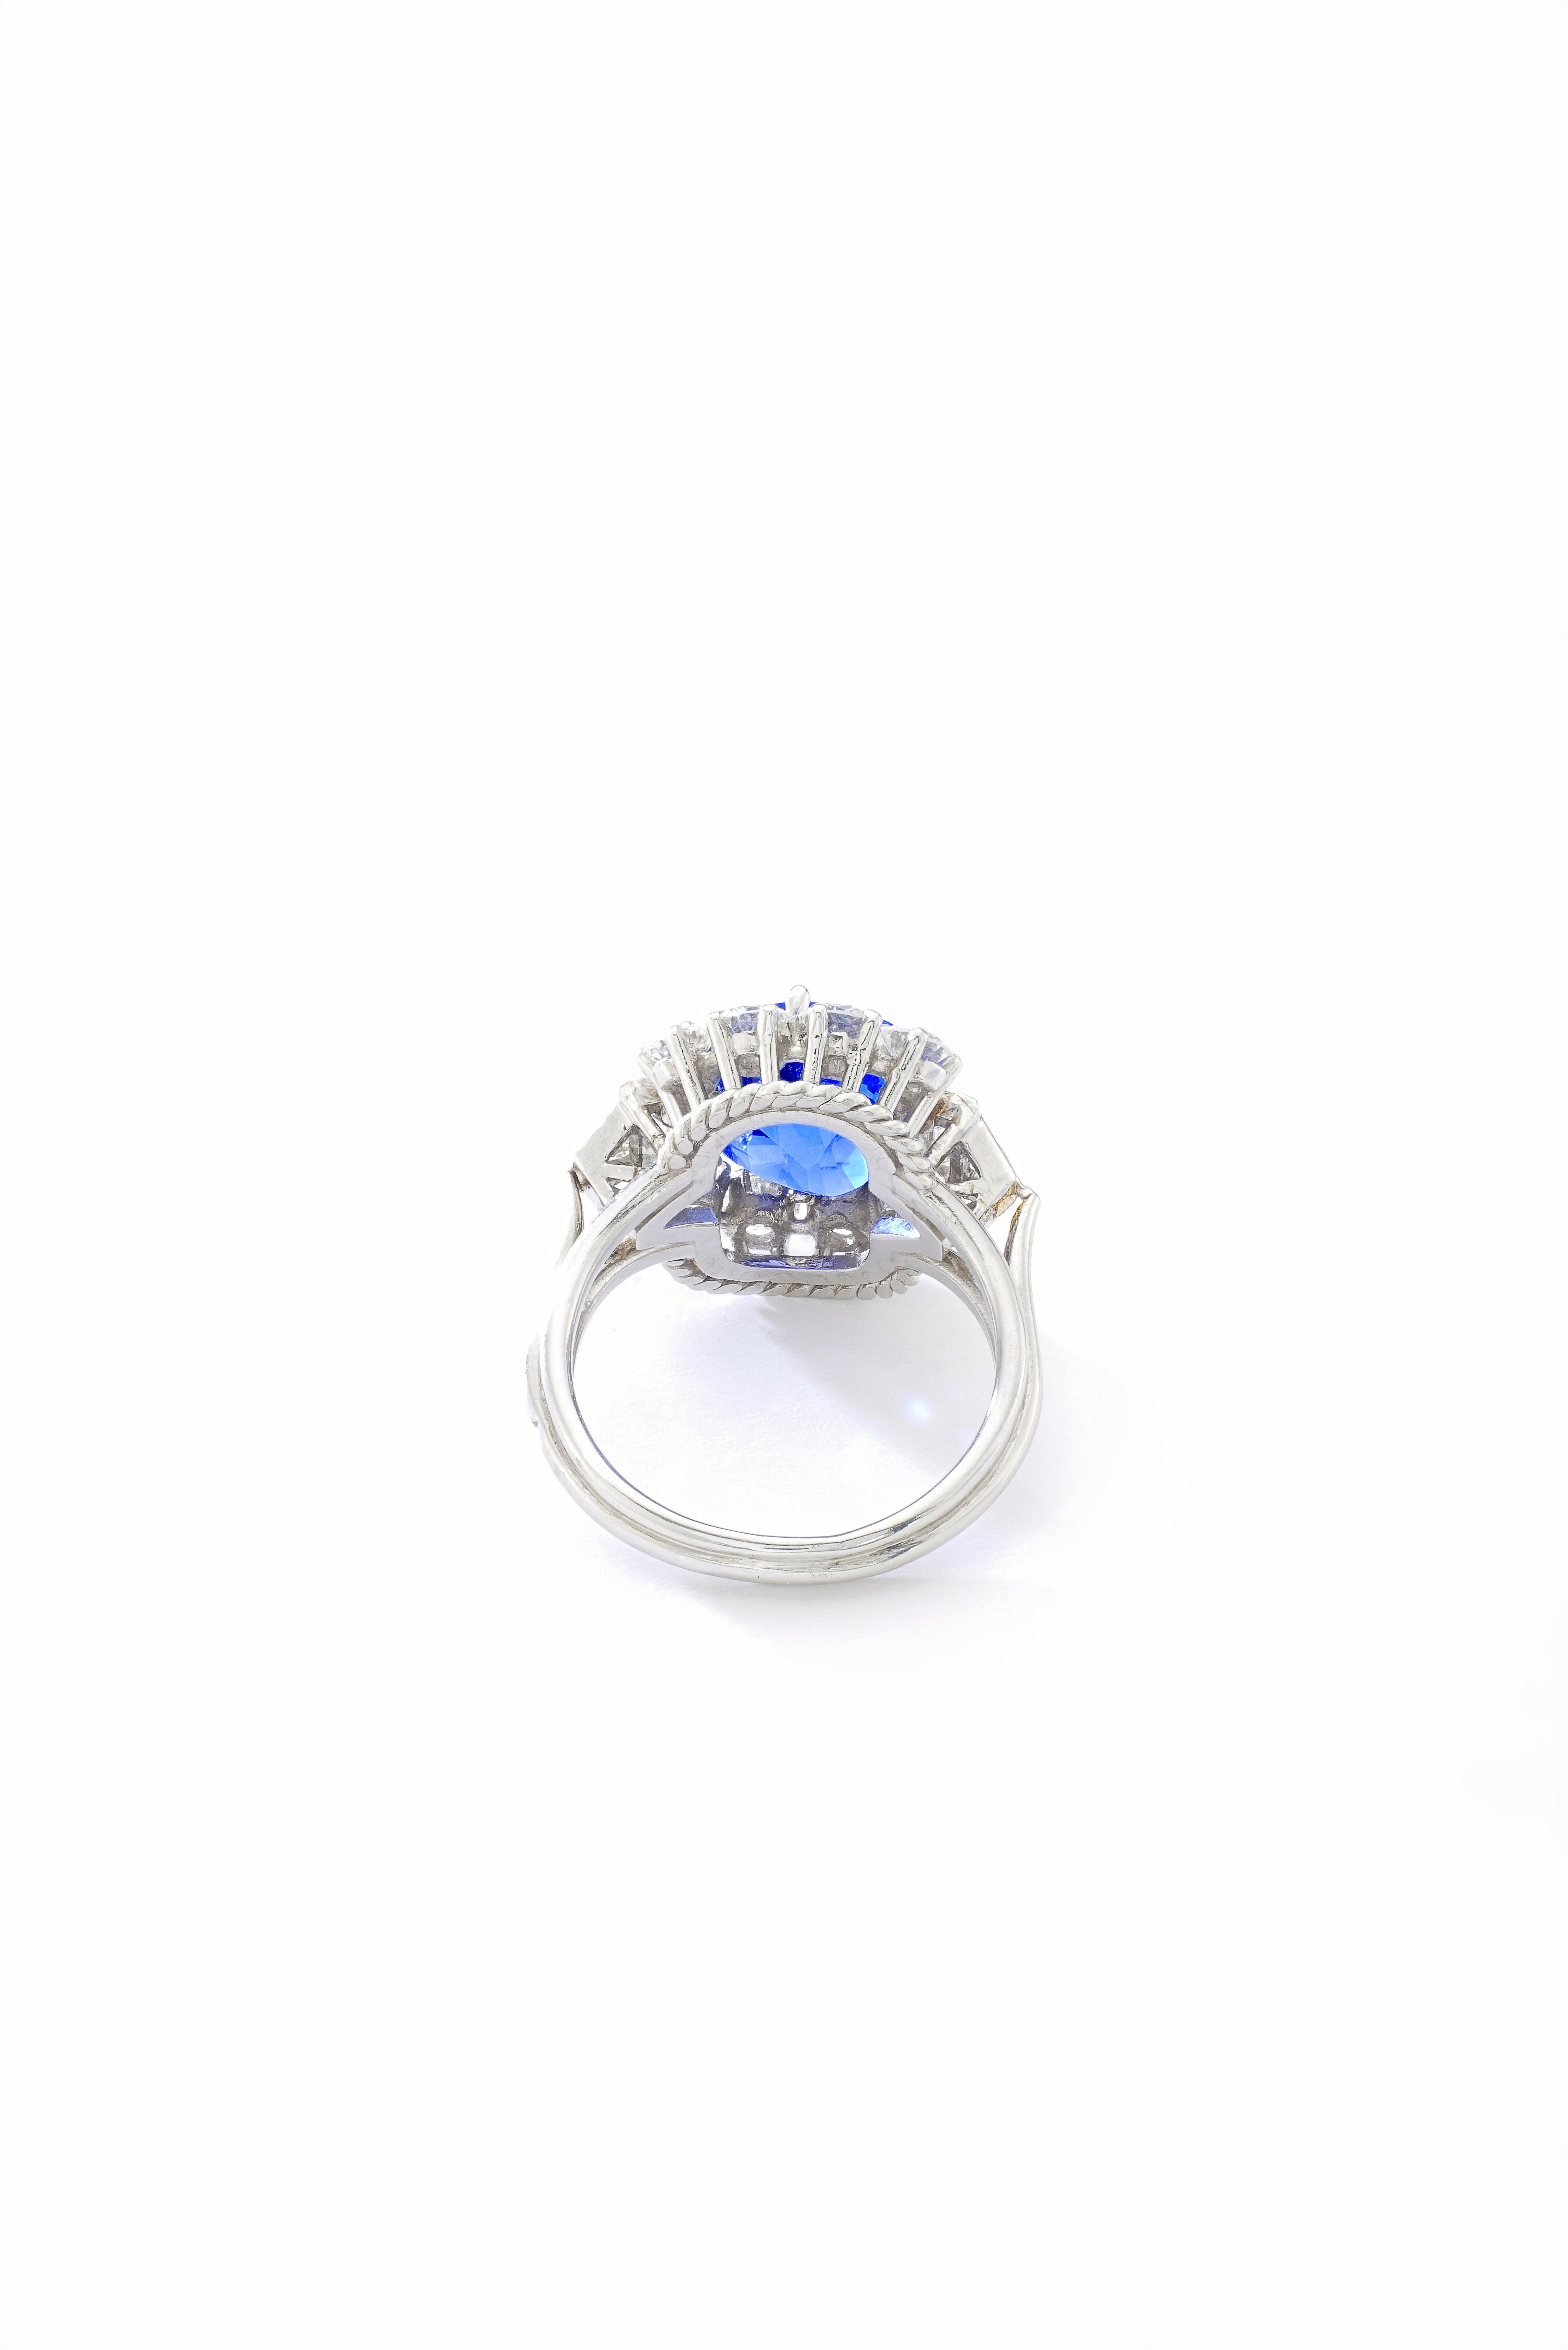 Cushion Cut 7.02 Carat Natural Sapphire French Diamond Platinum Ring 1940s For Sale